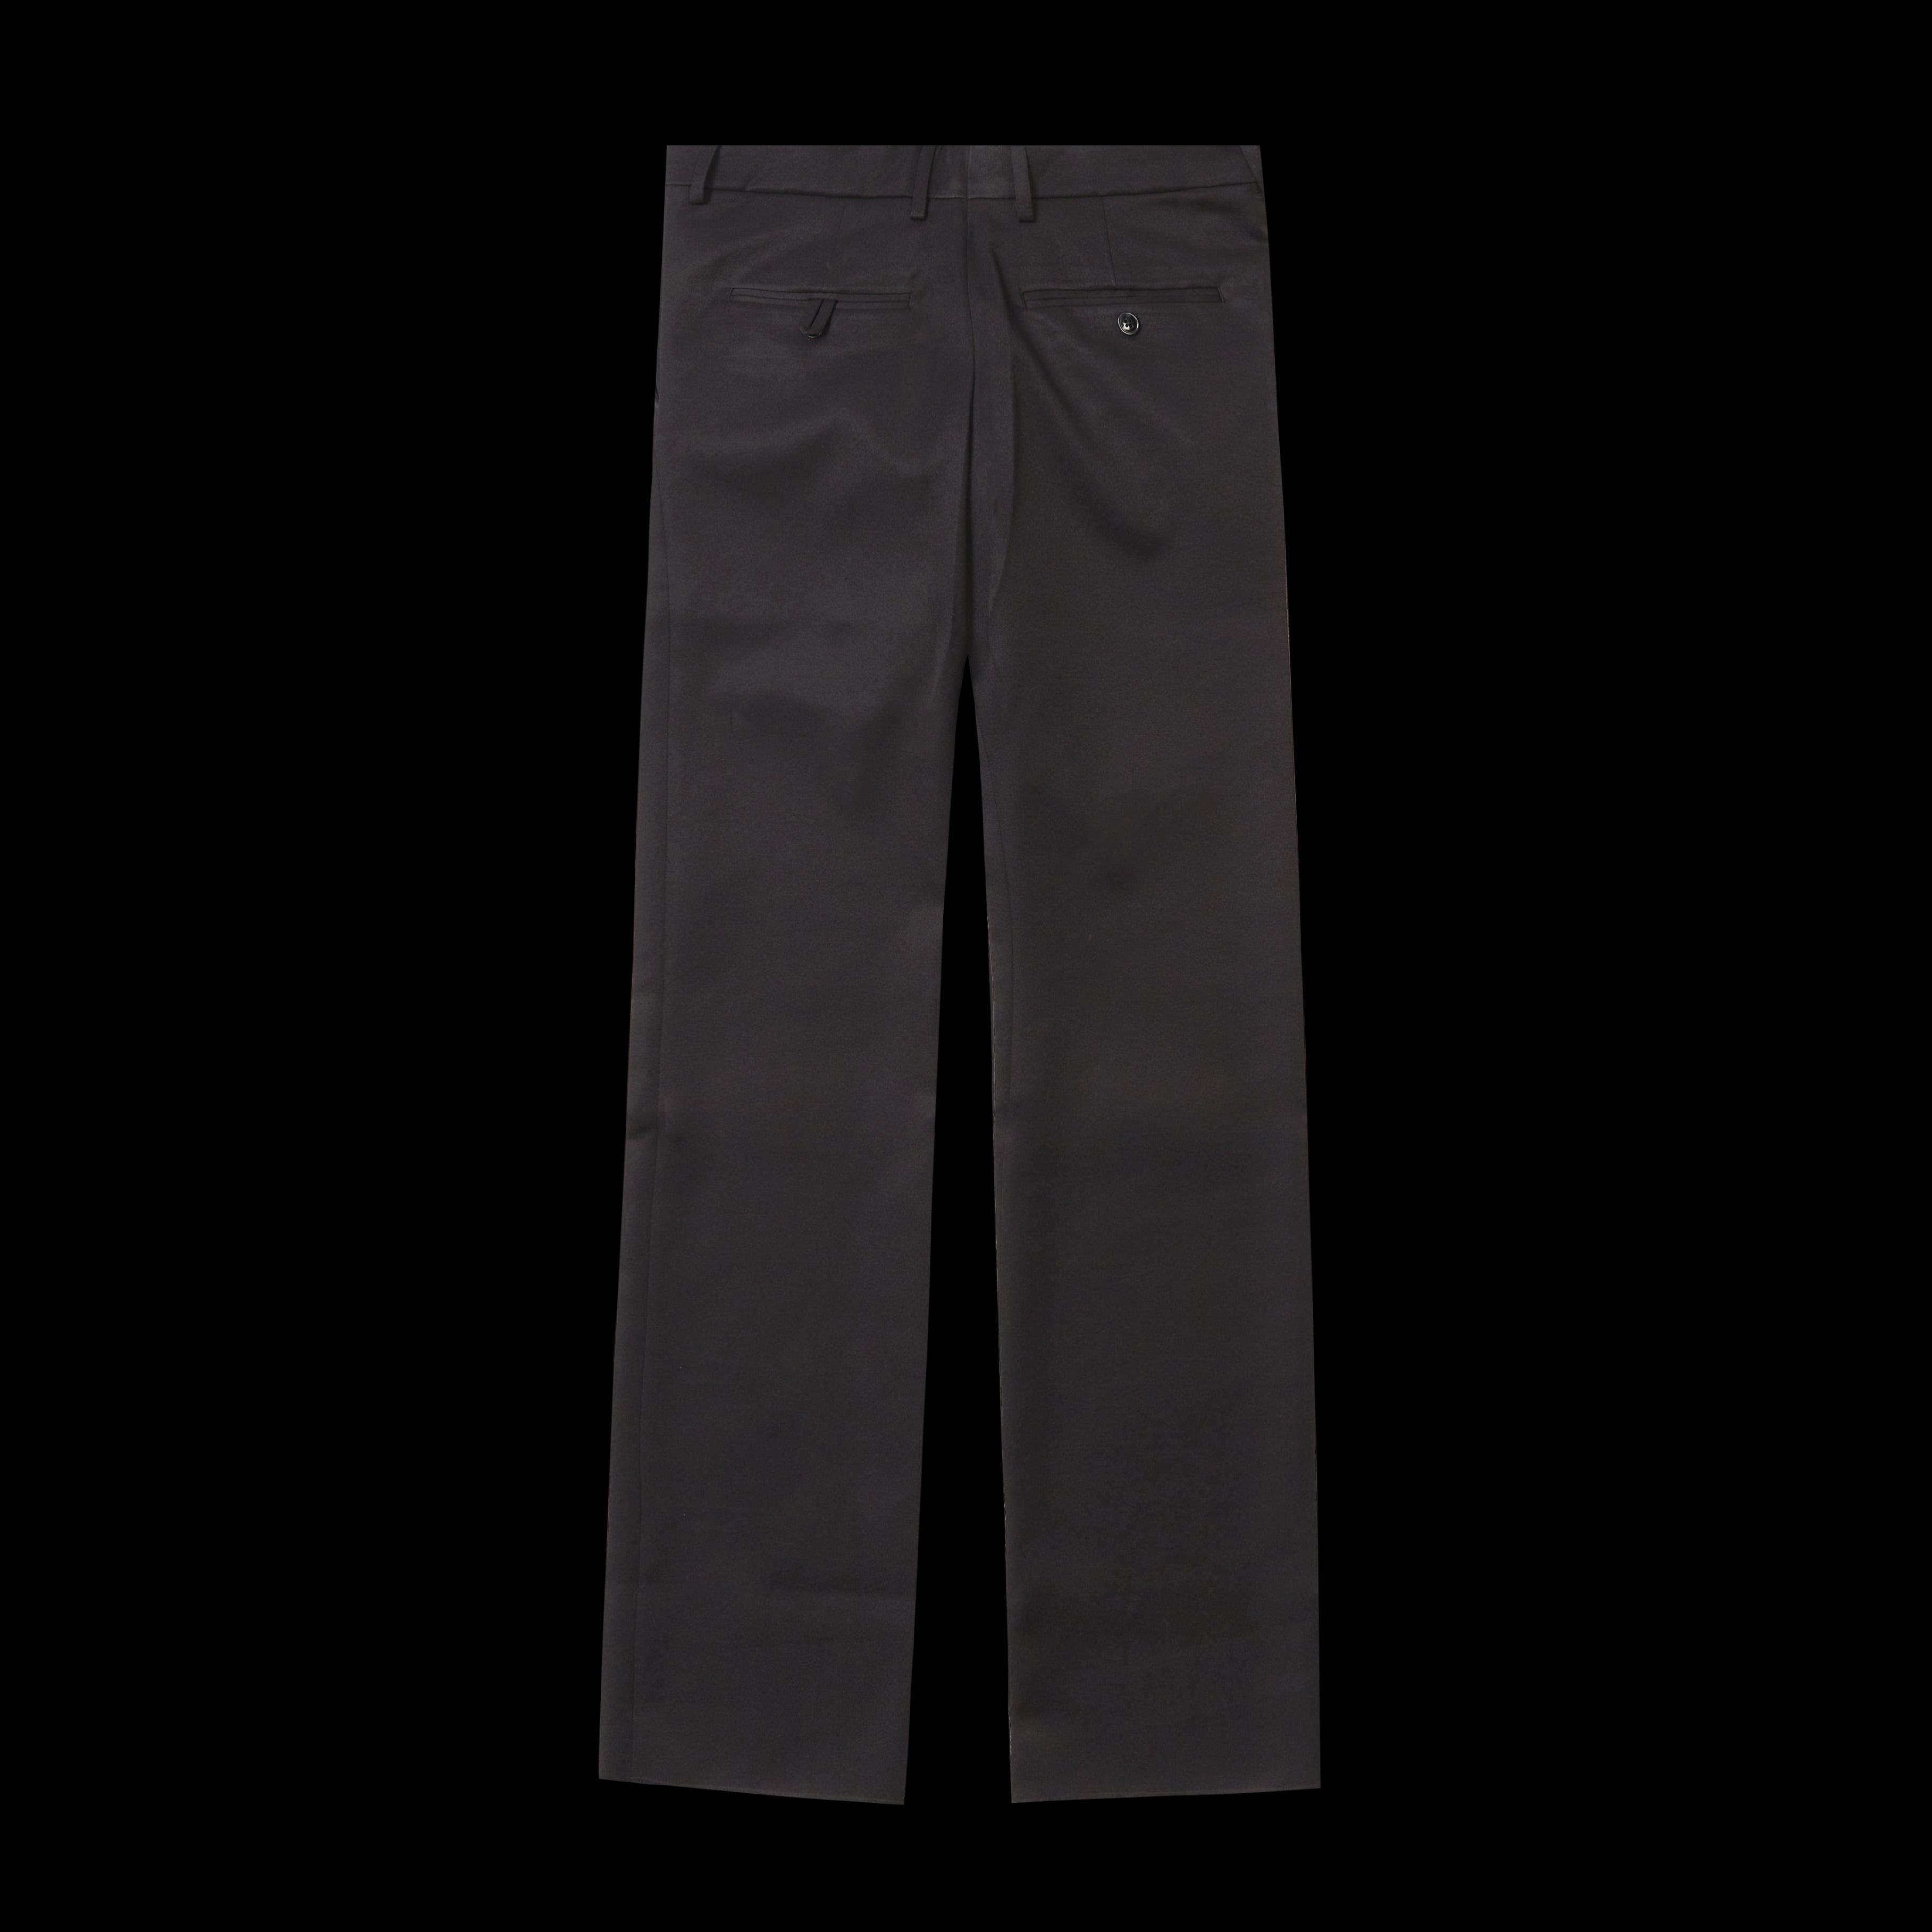 MARTINE ROSE WOVEN BUMSTER TAILORED TROUSER